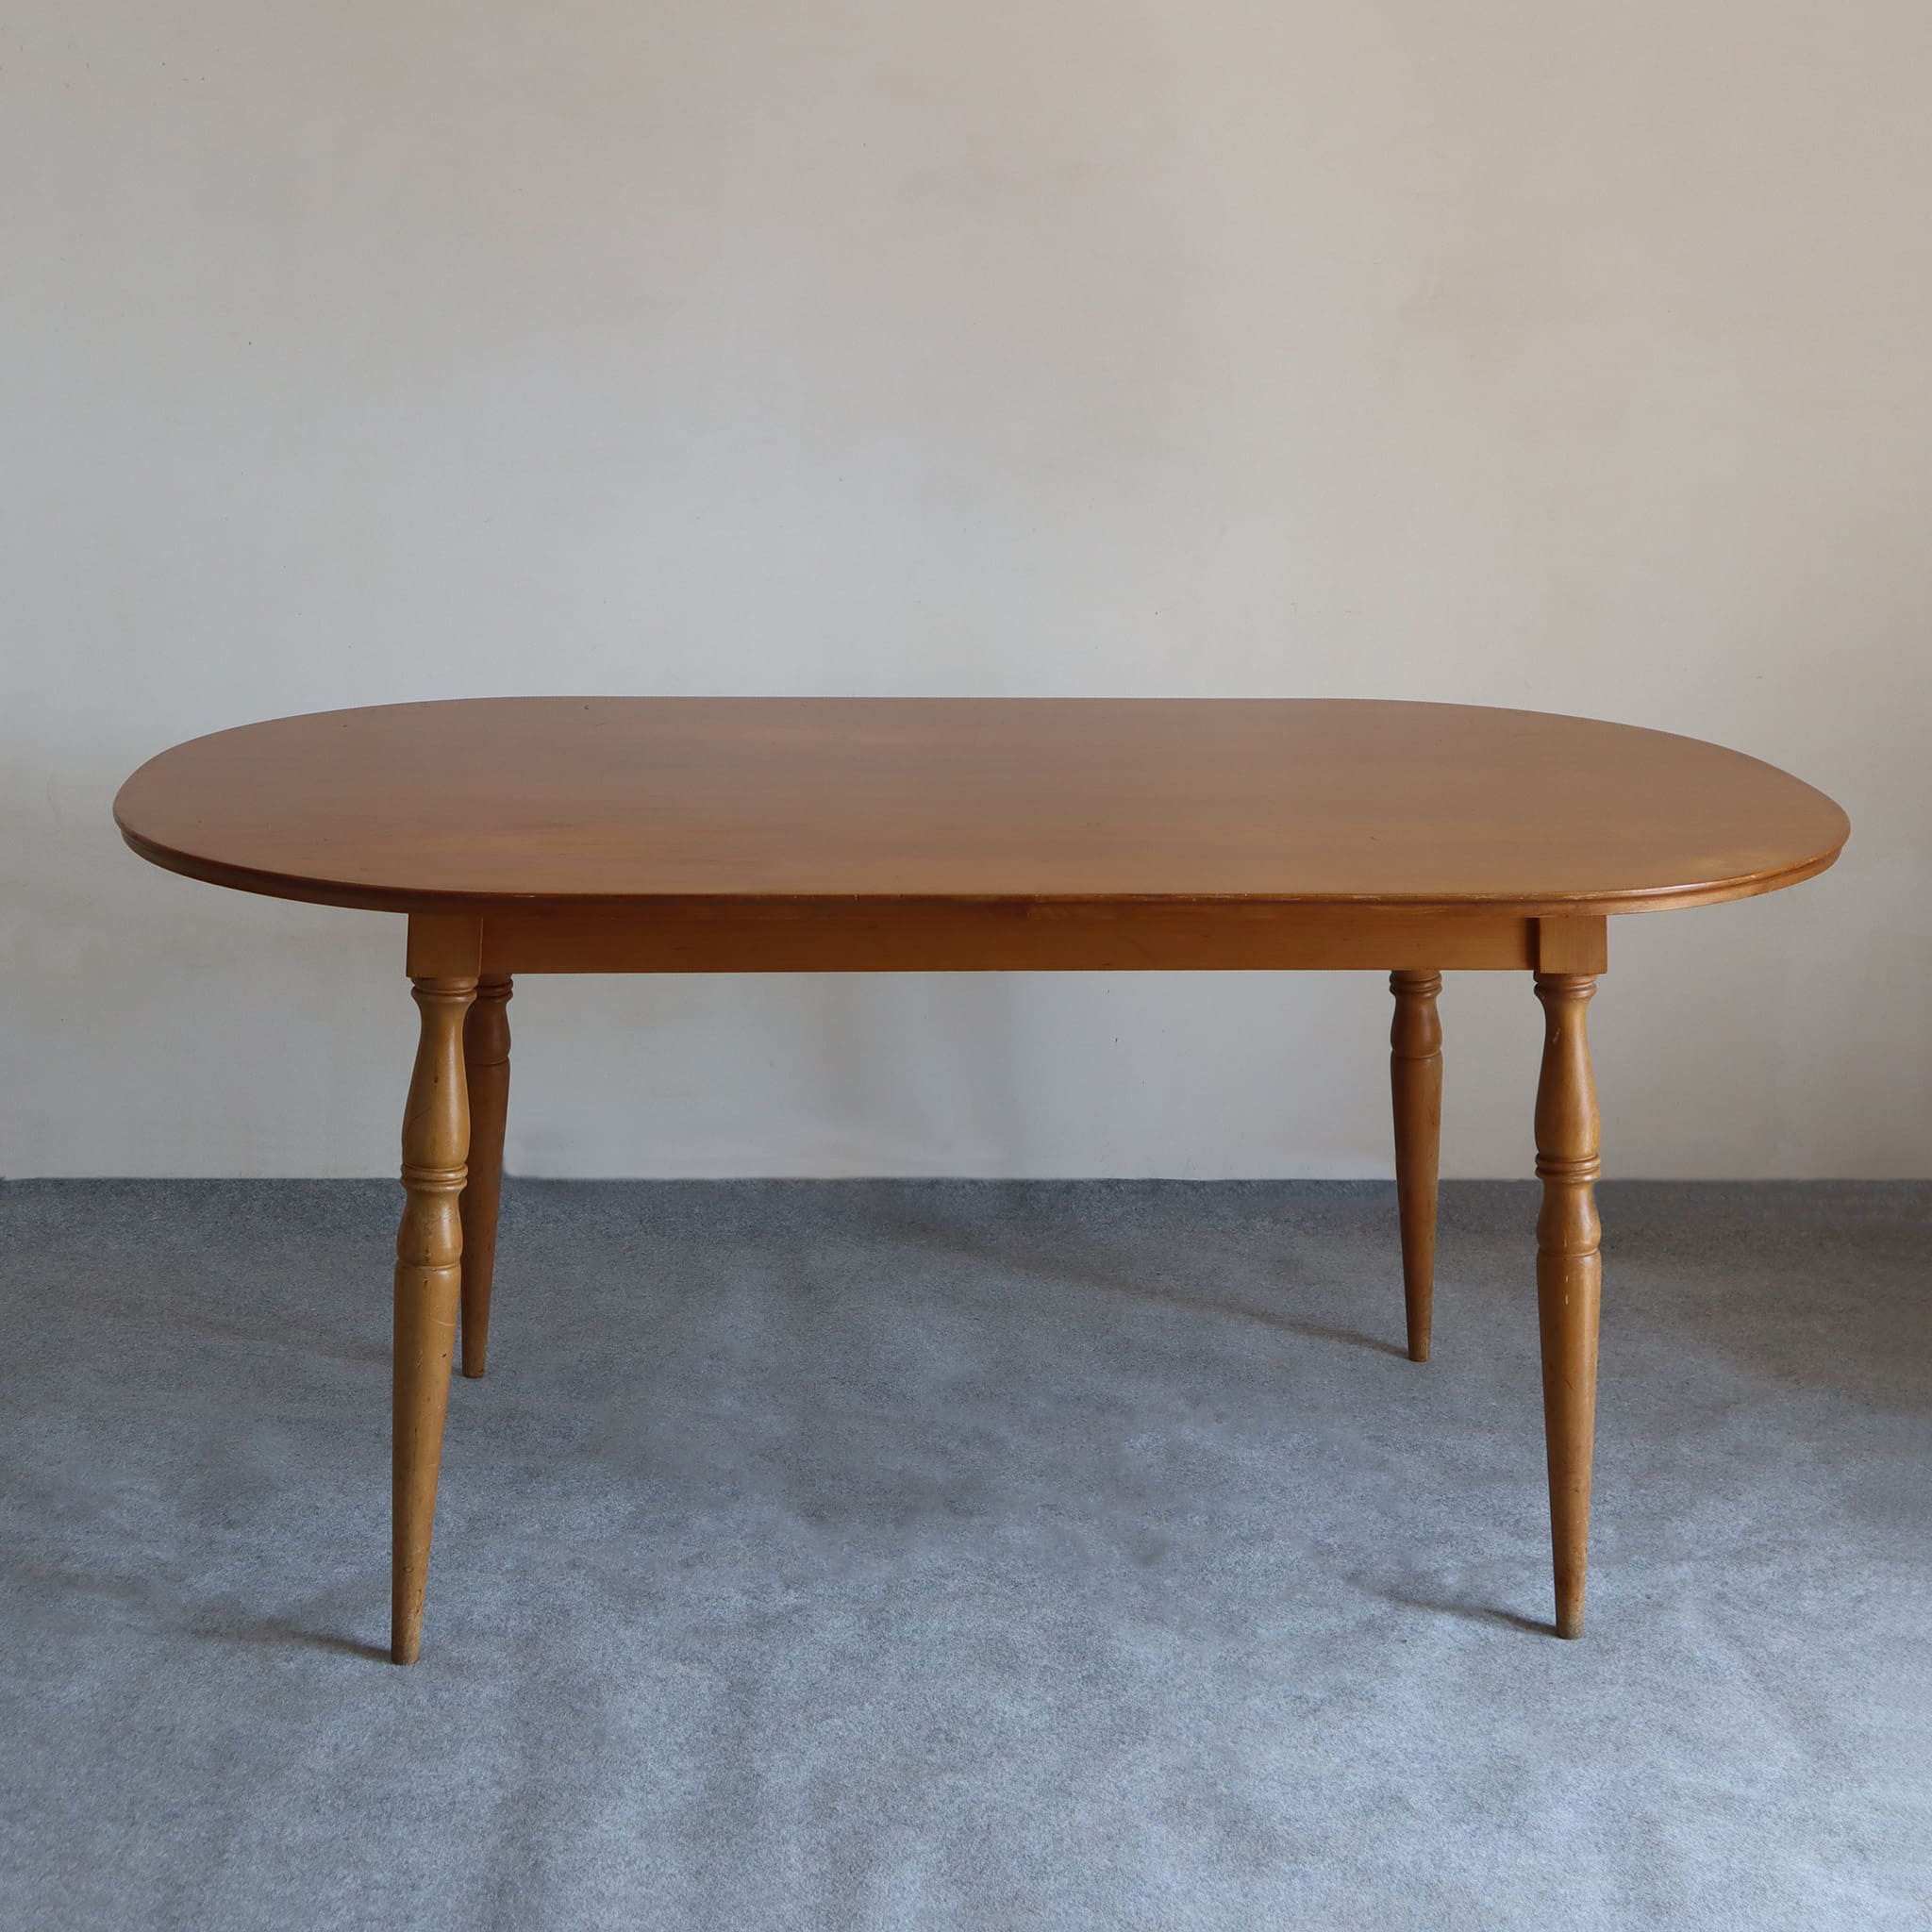 visionidepoca-modern-antique-vintage-60s-table-isa-bergamo-in-solid-beech-wood-with-original-plate-side-view